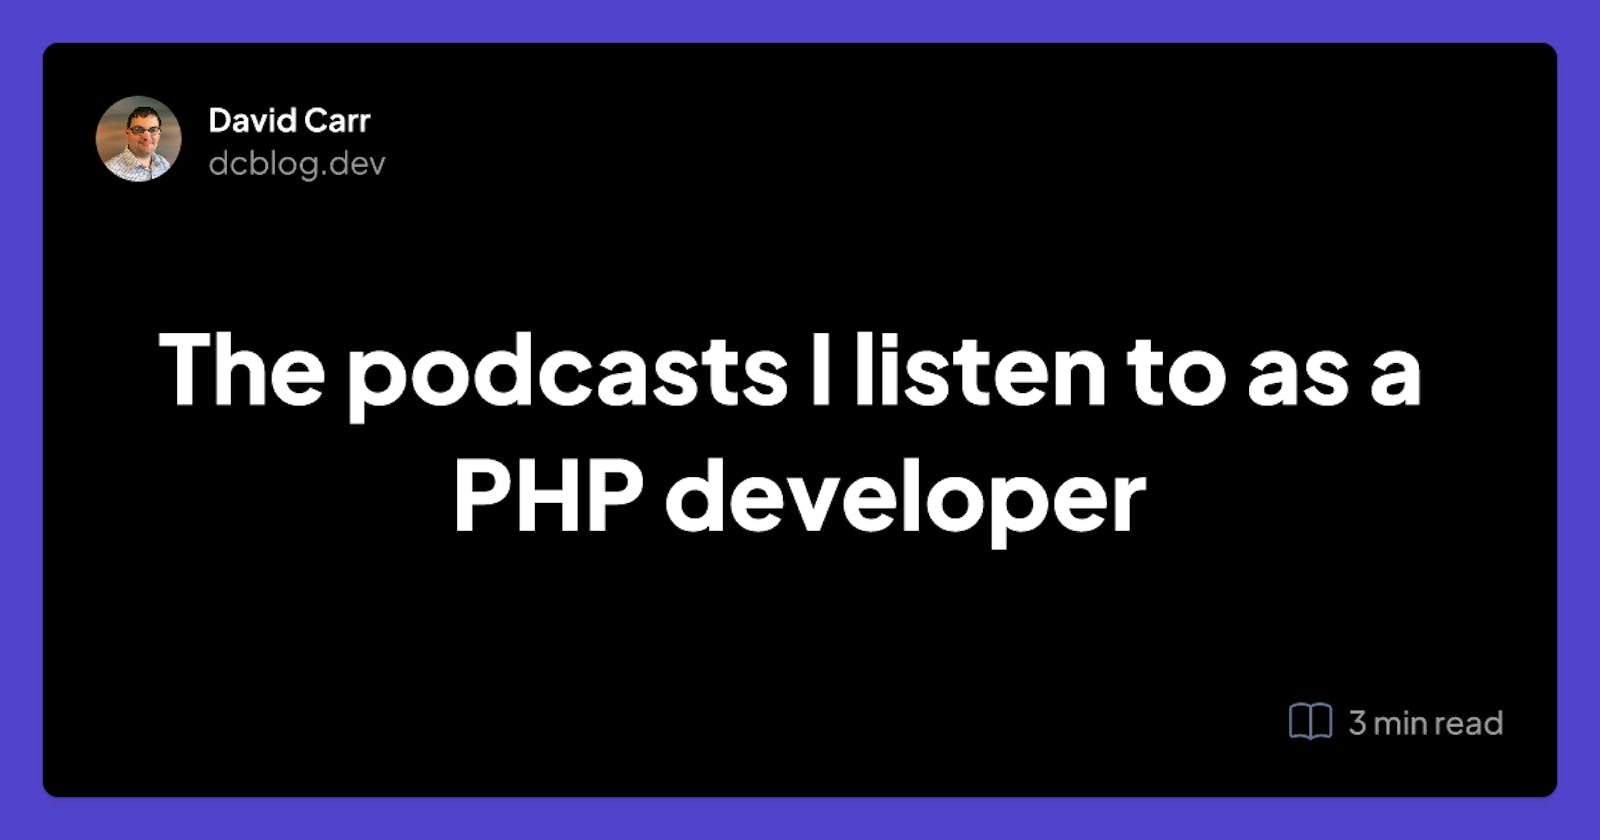 The podcasts I listen to as a PHP developer